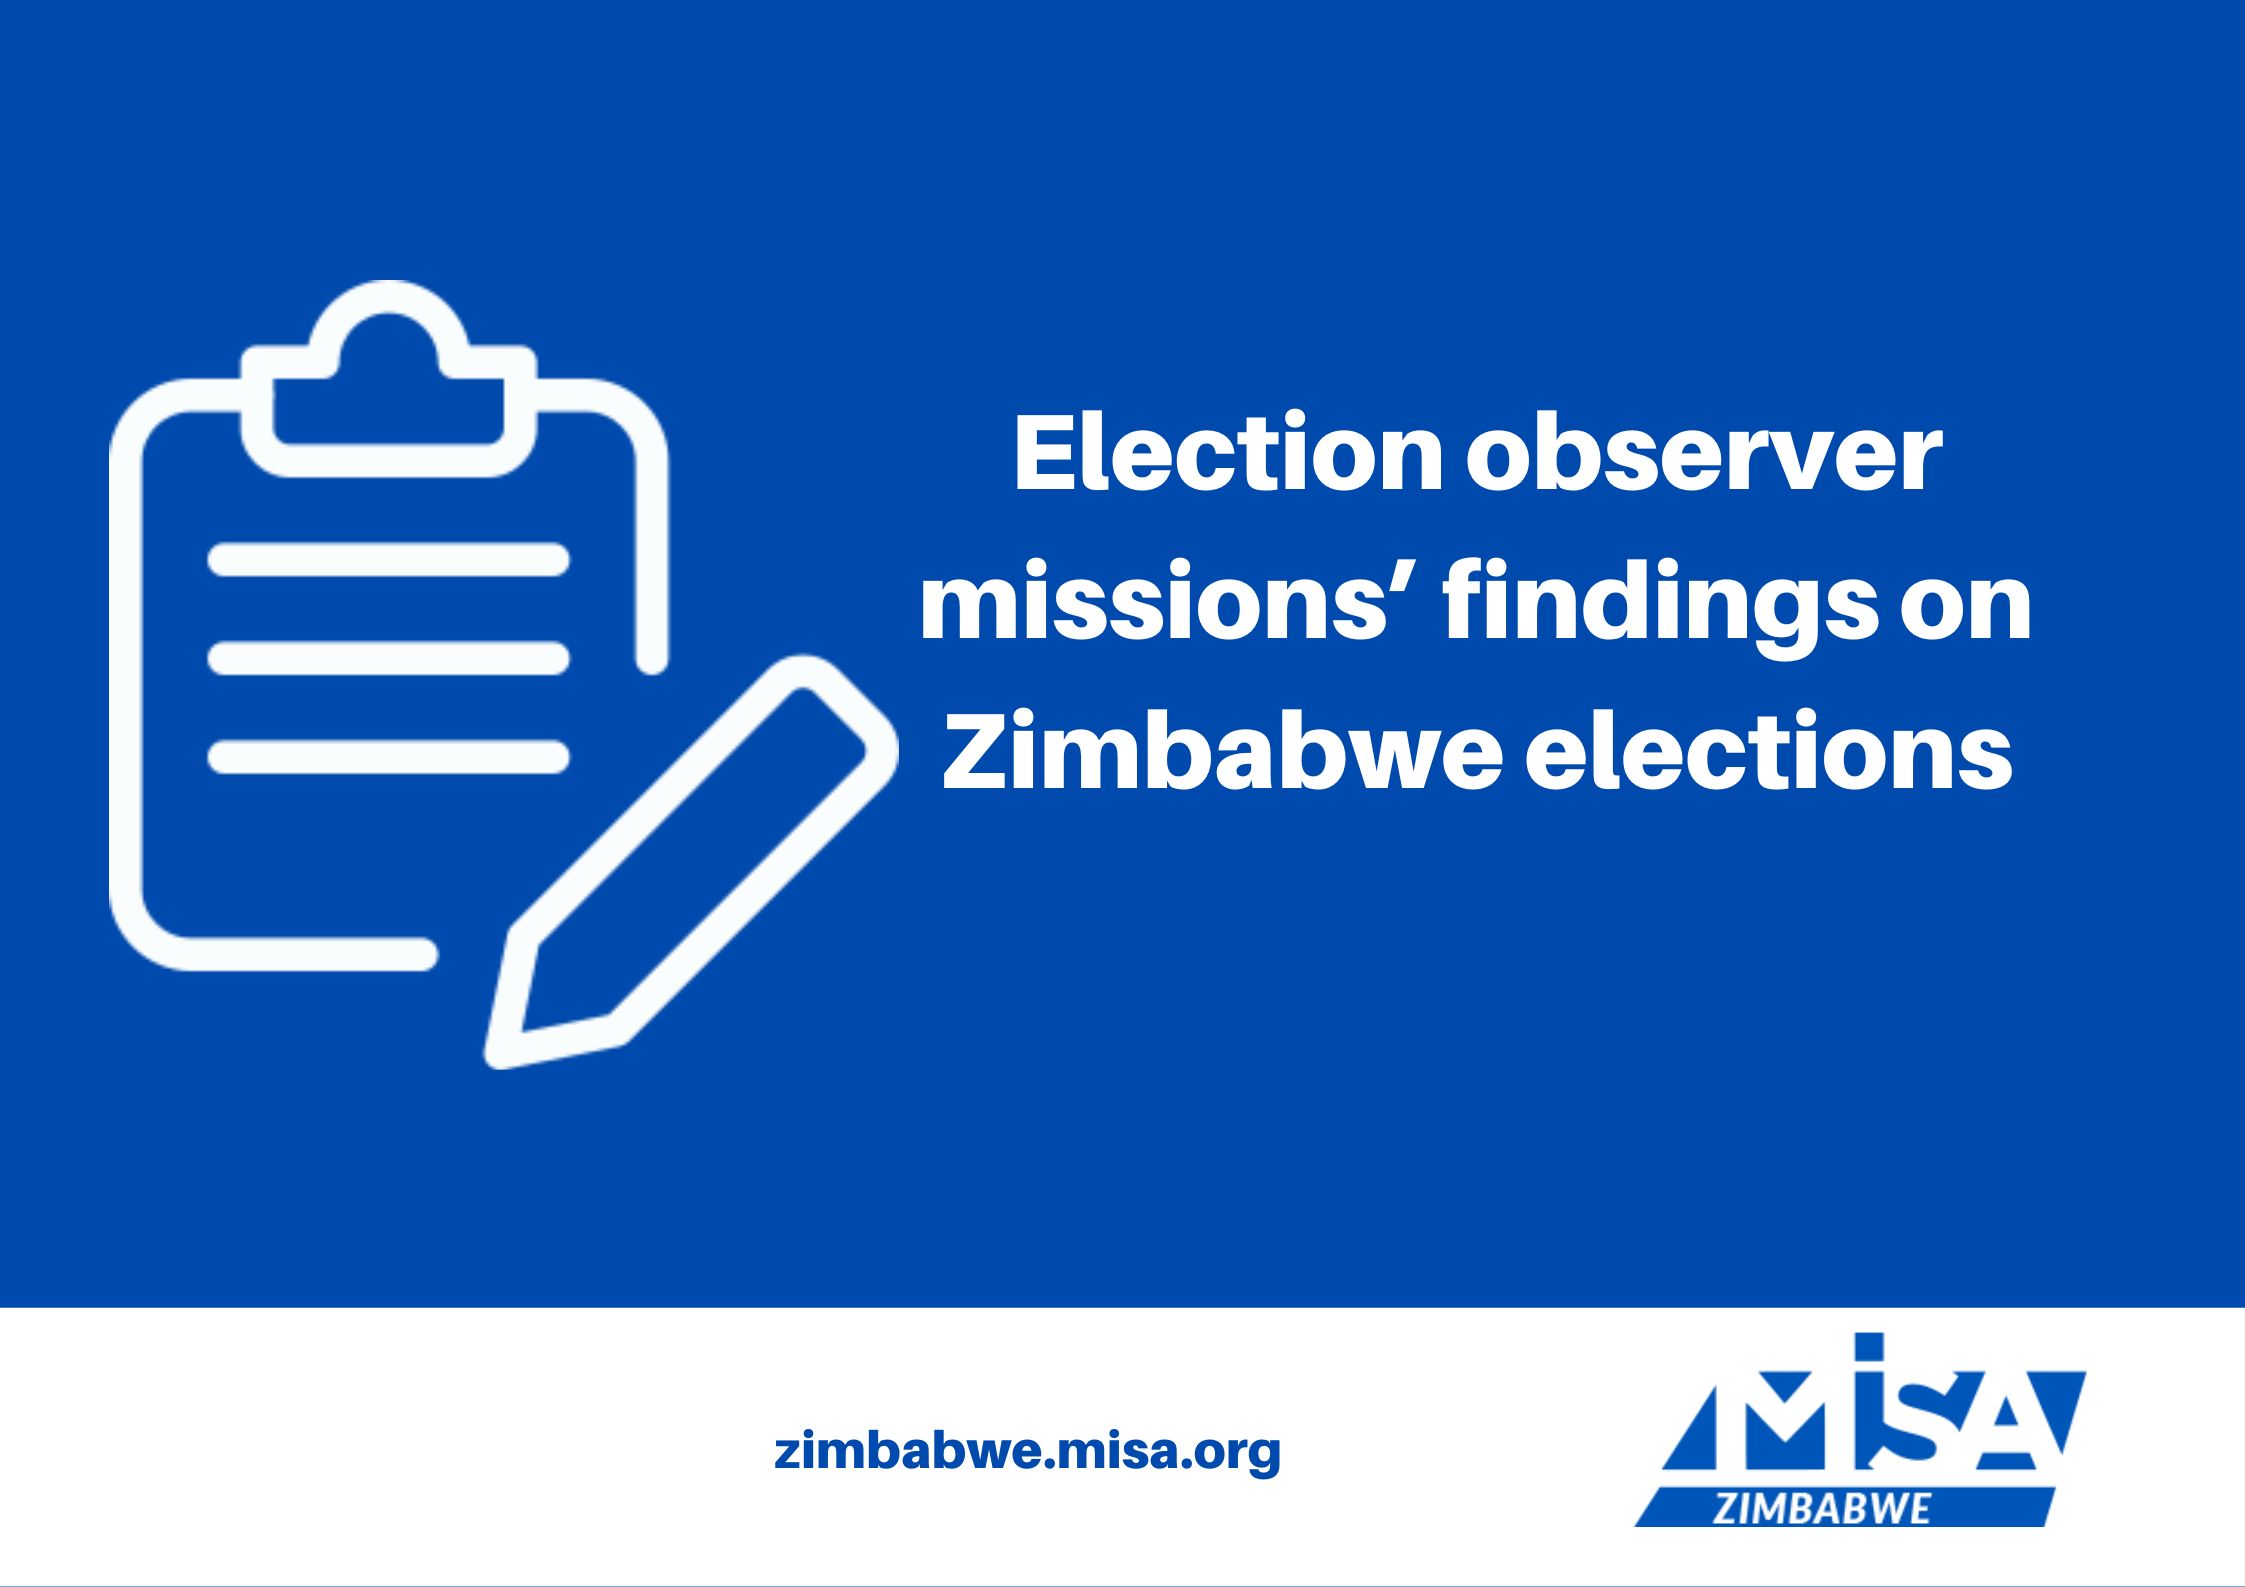 Election observer missions’ findings on Zimbabwe elections